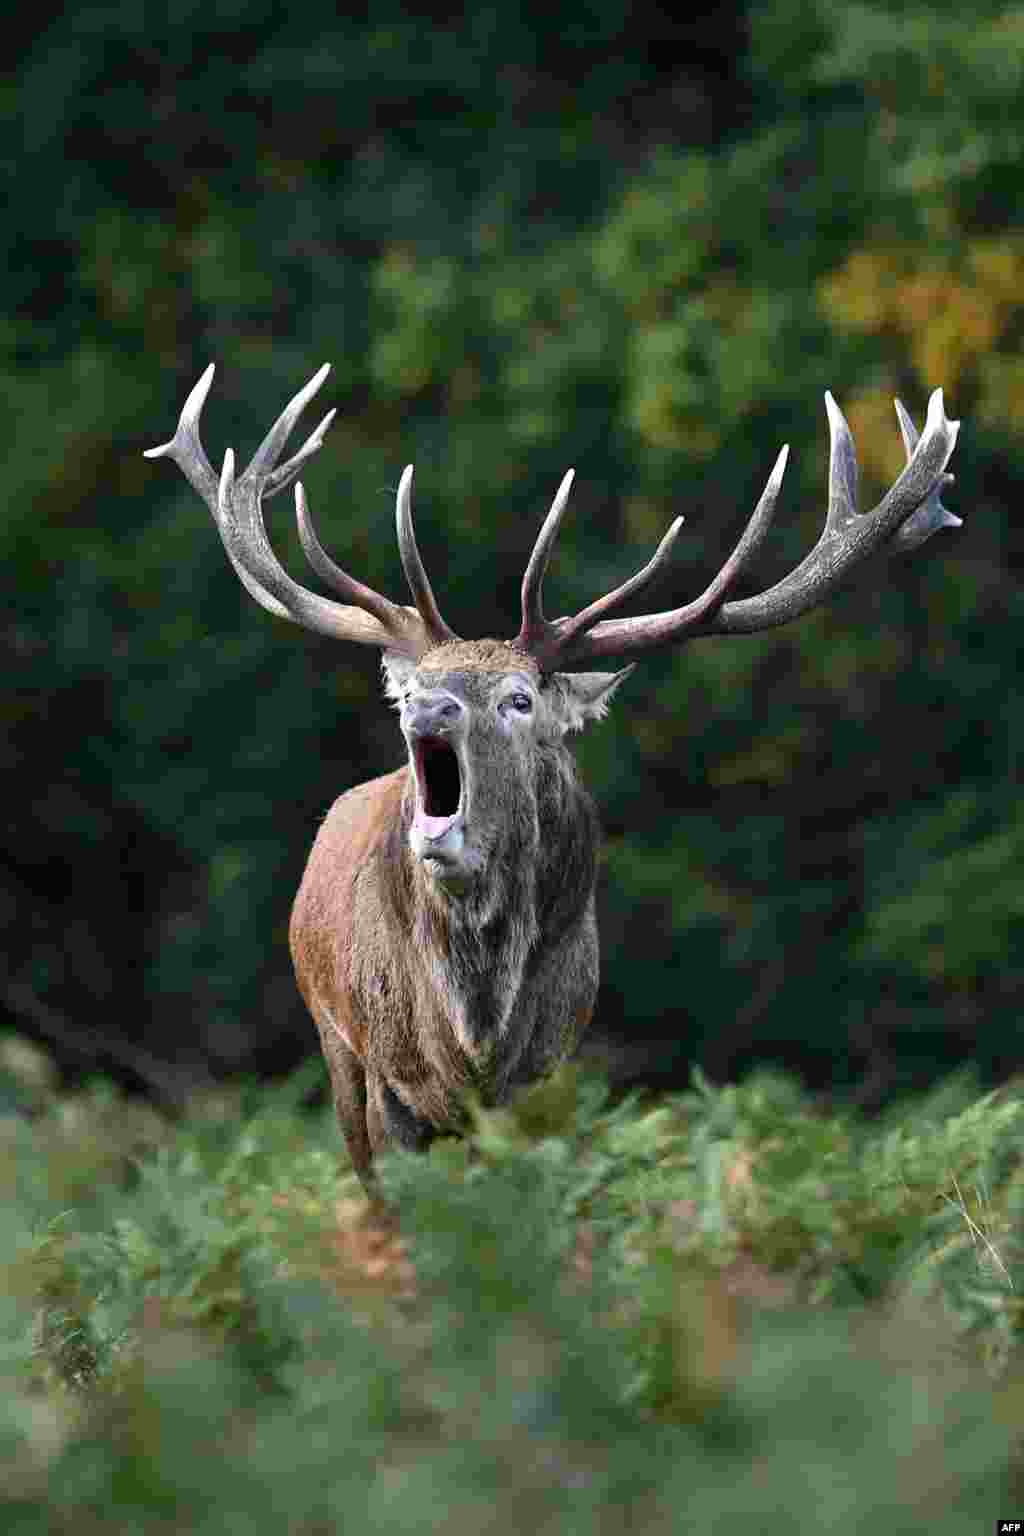 A red deer stag roars in Richmond park during its breeding season in south west London.